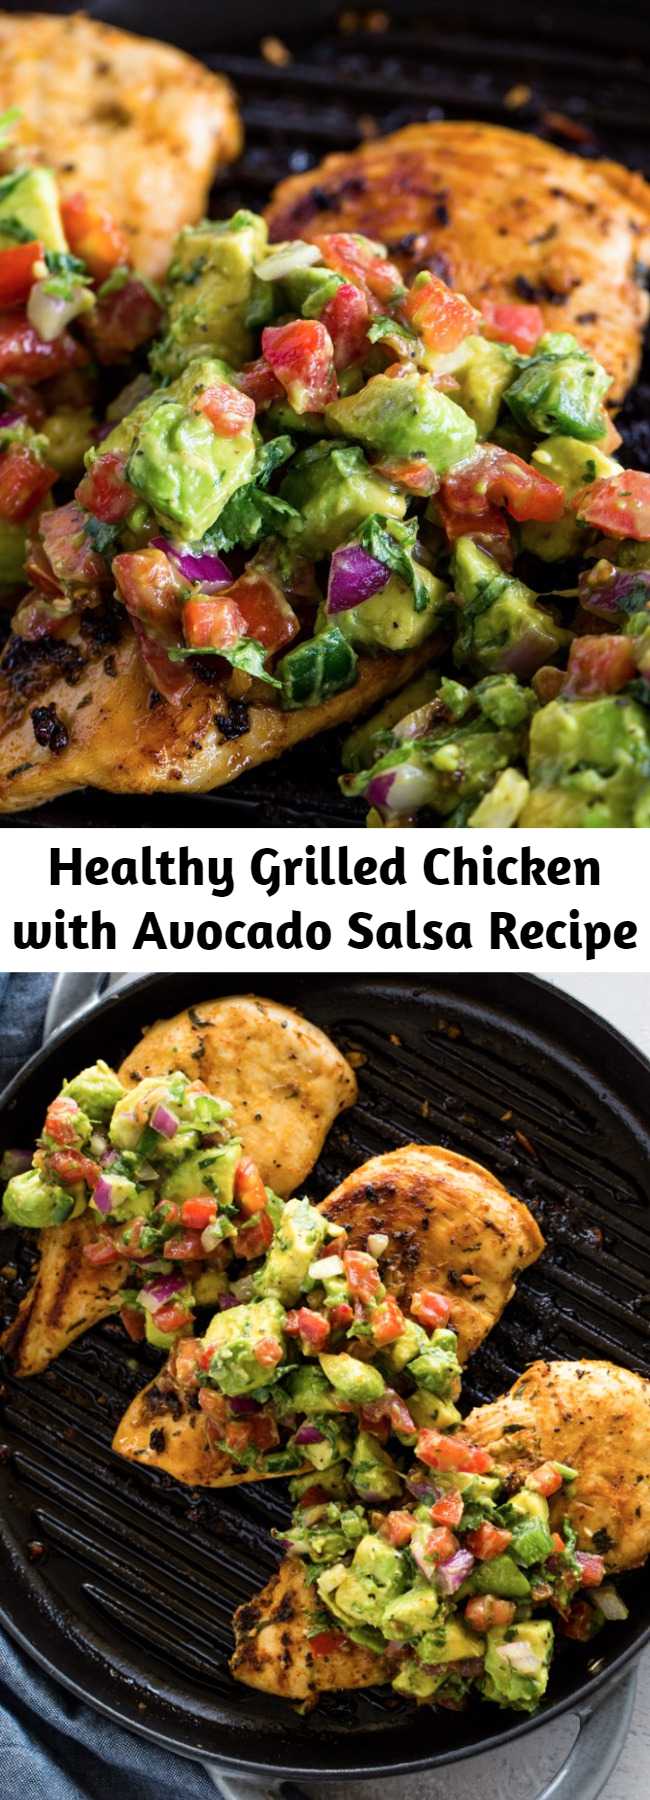 Healthy Grilled Chicken with Avocado Salsa Recipe - Healthy Cilantro Lime grilled chicken breasts topped with fresh avocado salsa making this dish a DELICIOUS low-carb & Keto Dinner in under 30 minutes!